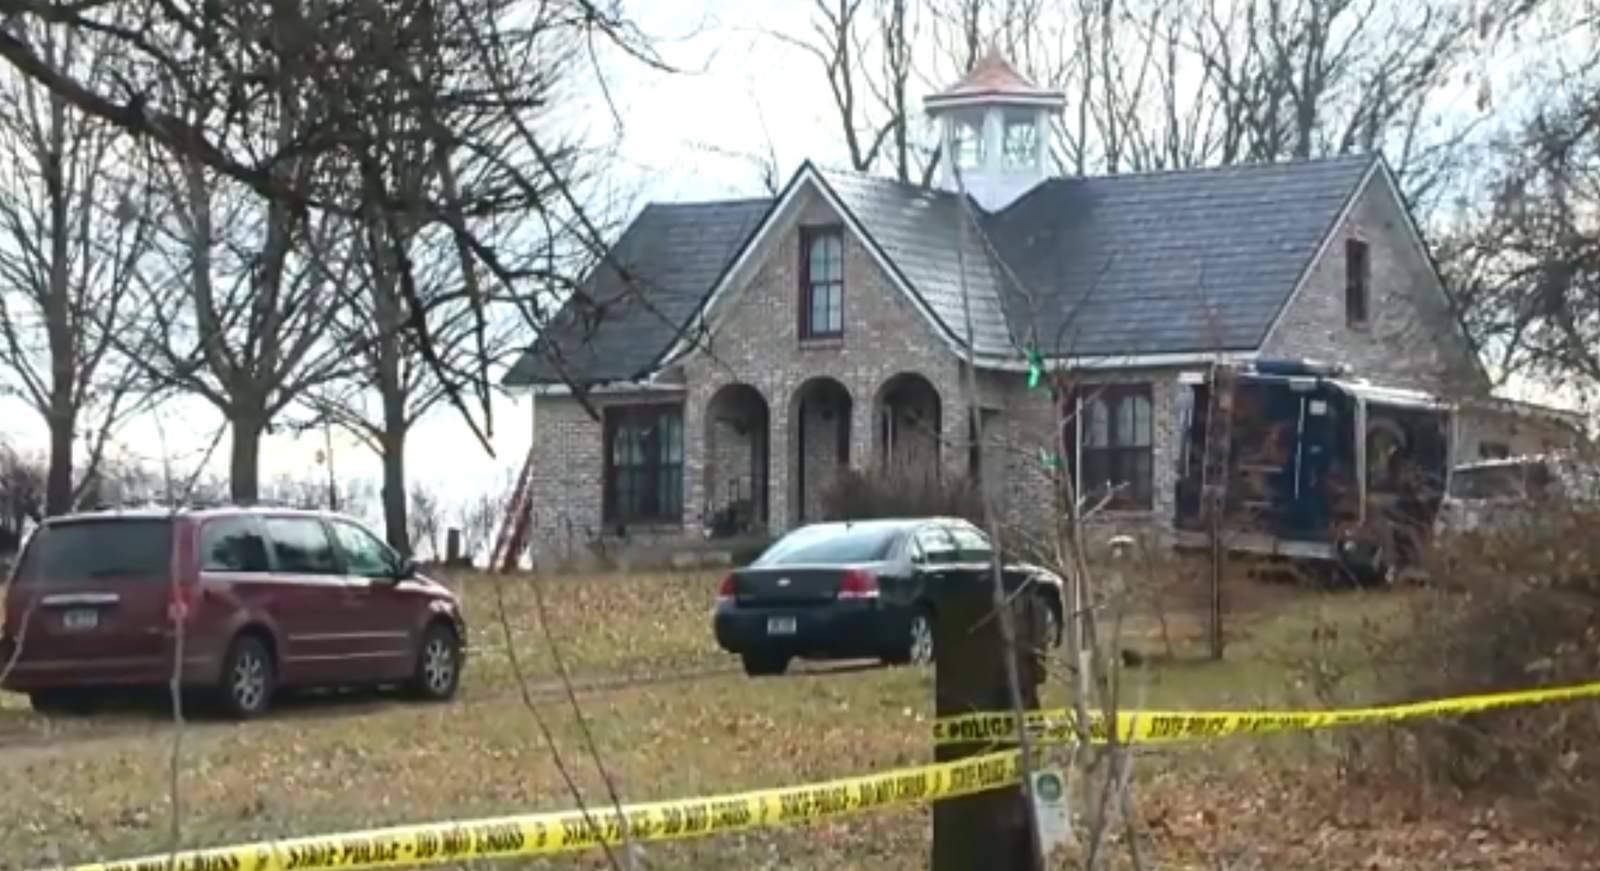 2 men called 911 after escaping home of Michigan man accused of brutal murder, mutilation